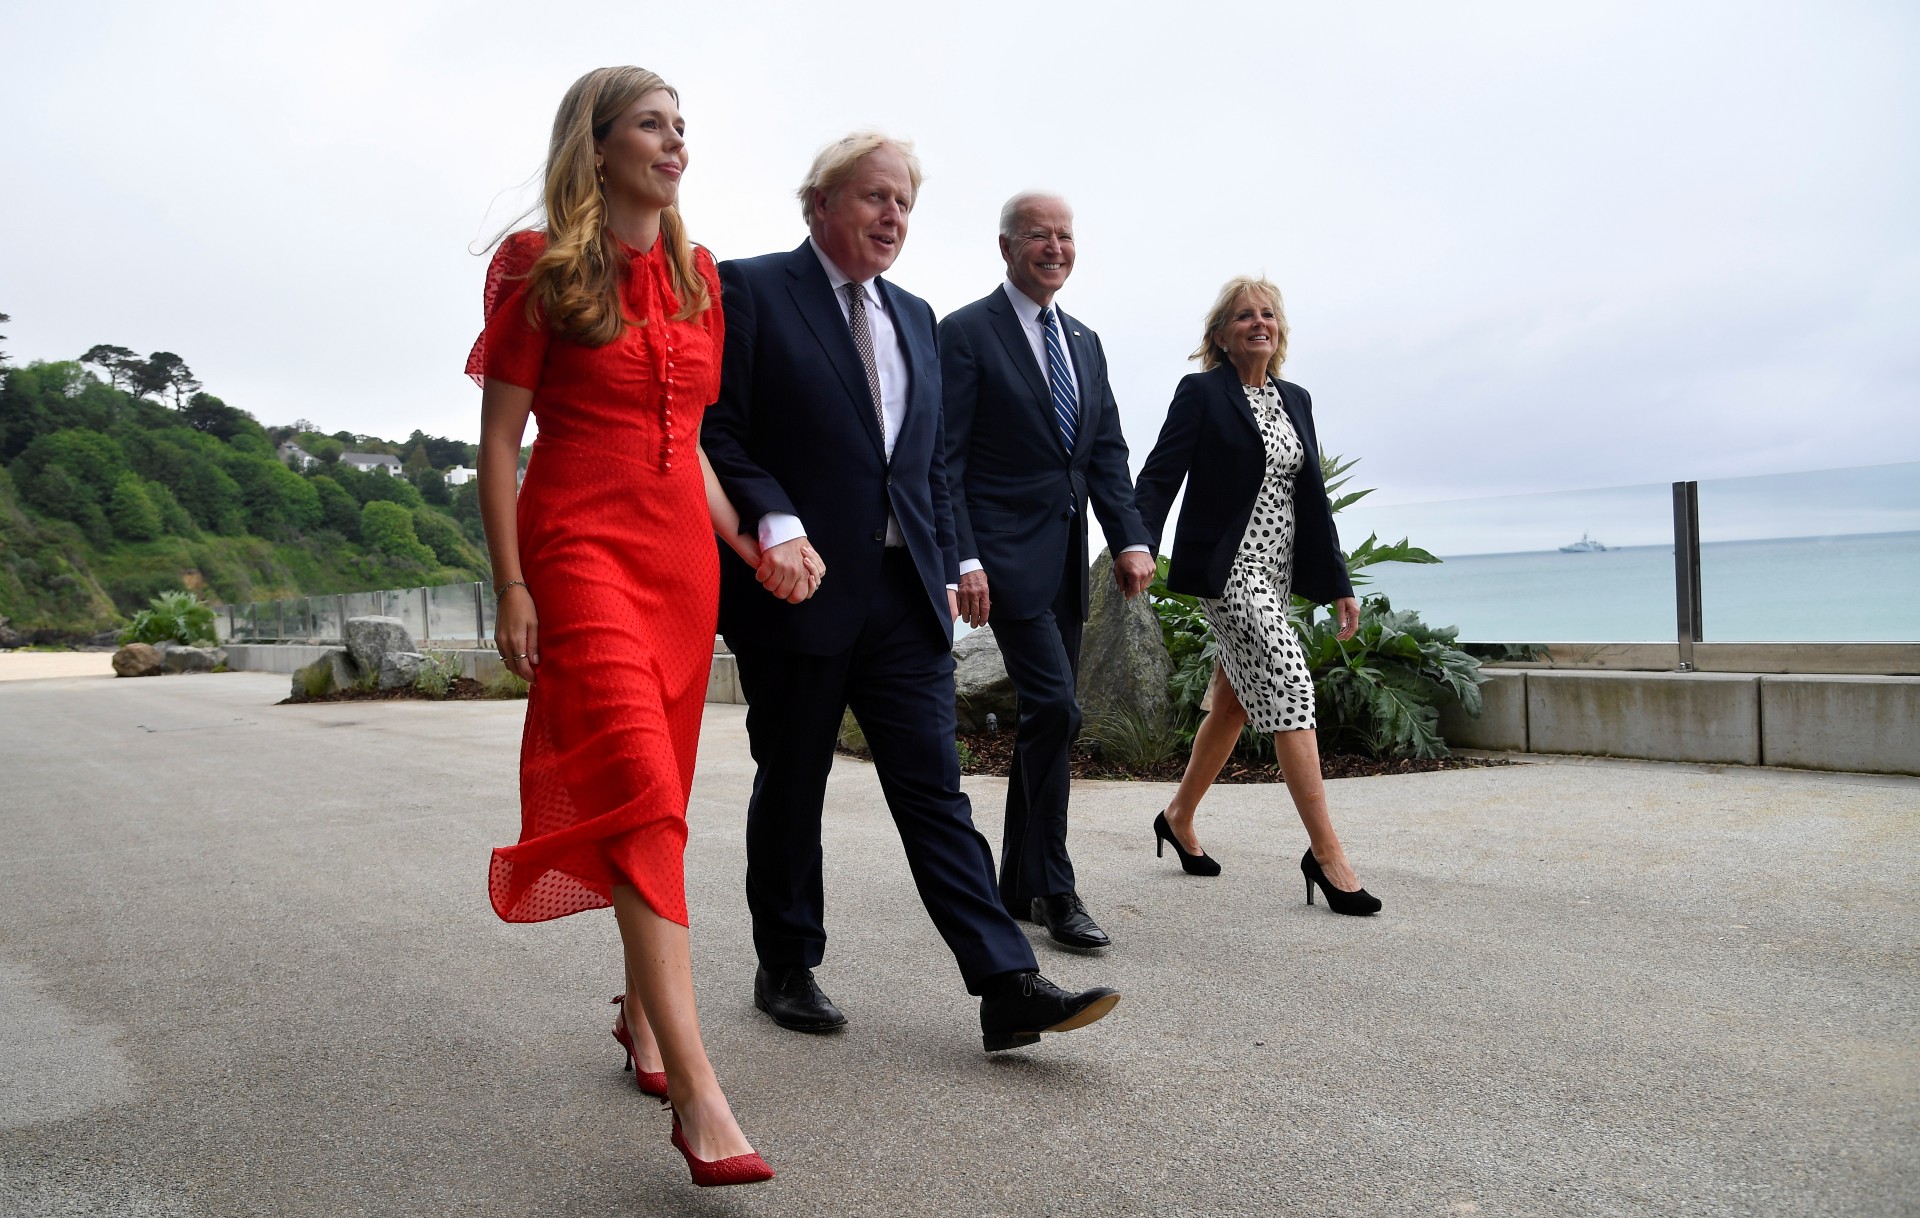 The Johnsons and Bidens in Cornwall